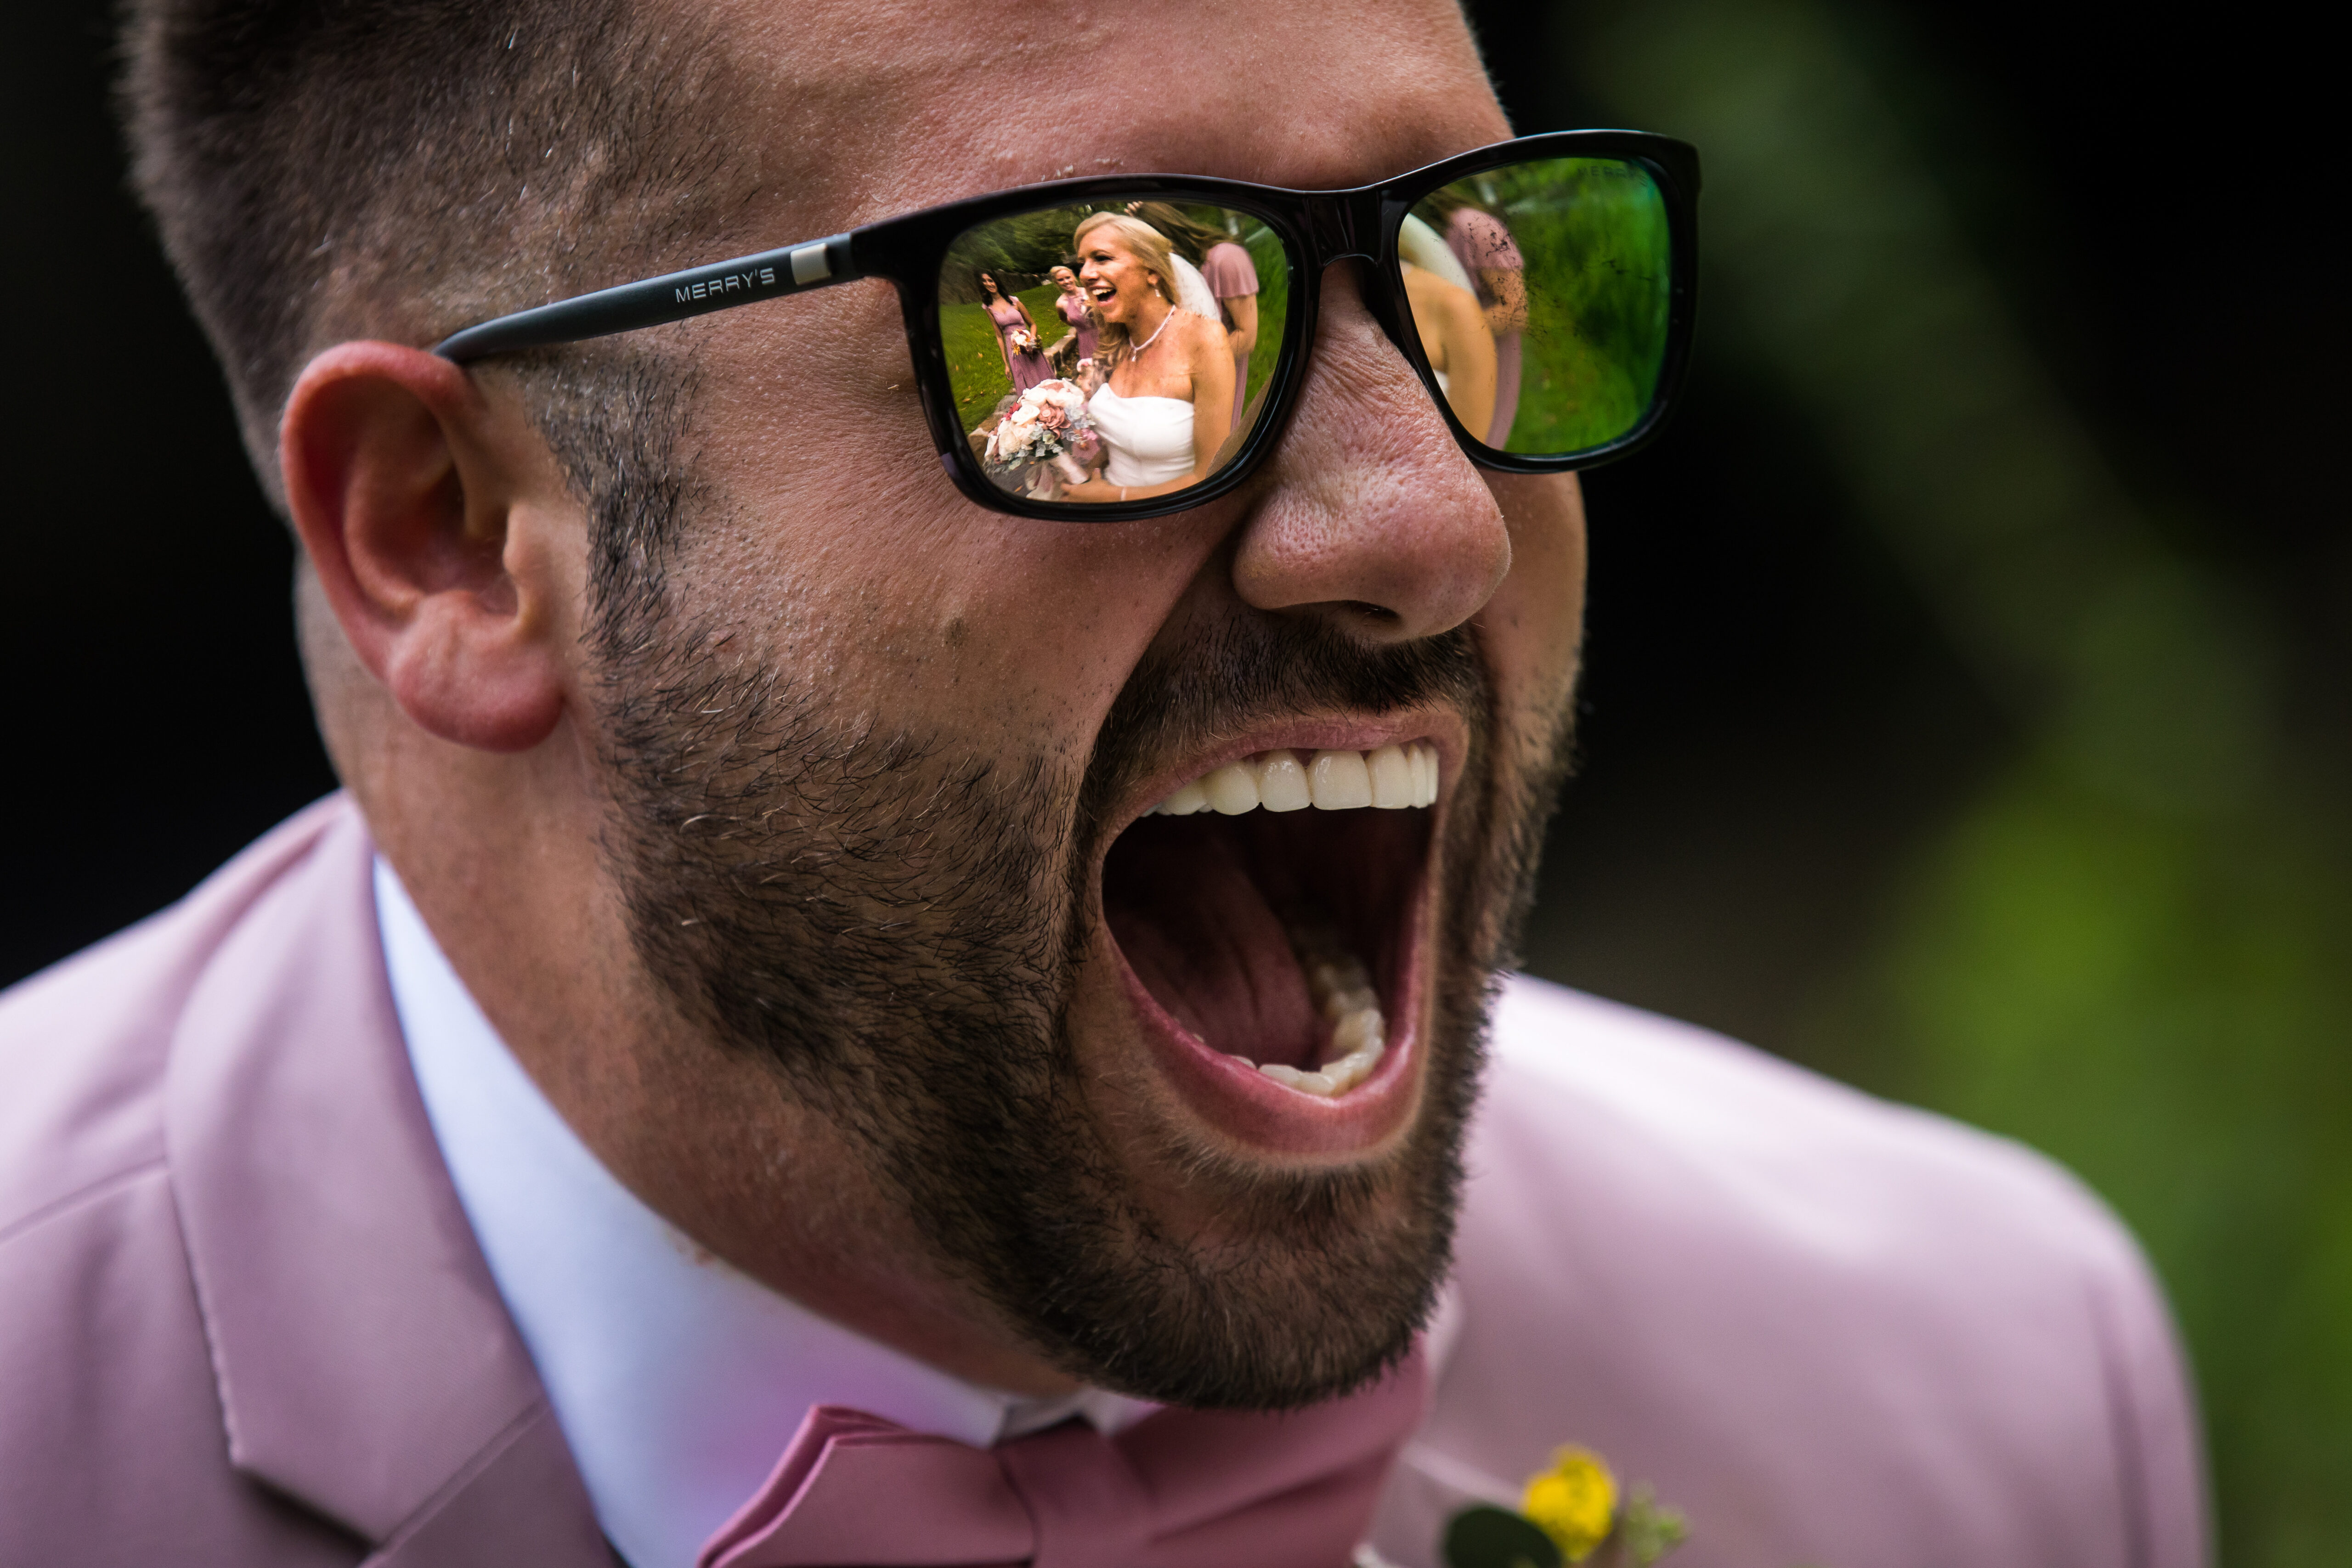 Creative PA Wedding Photographer, Lisa Rhinehart, captures this authentic image of  this bridesman smiling at the bride as he sees her for the first time caught through the reflection in his glasses